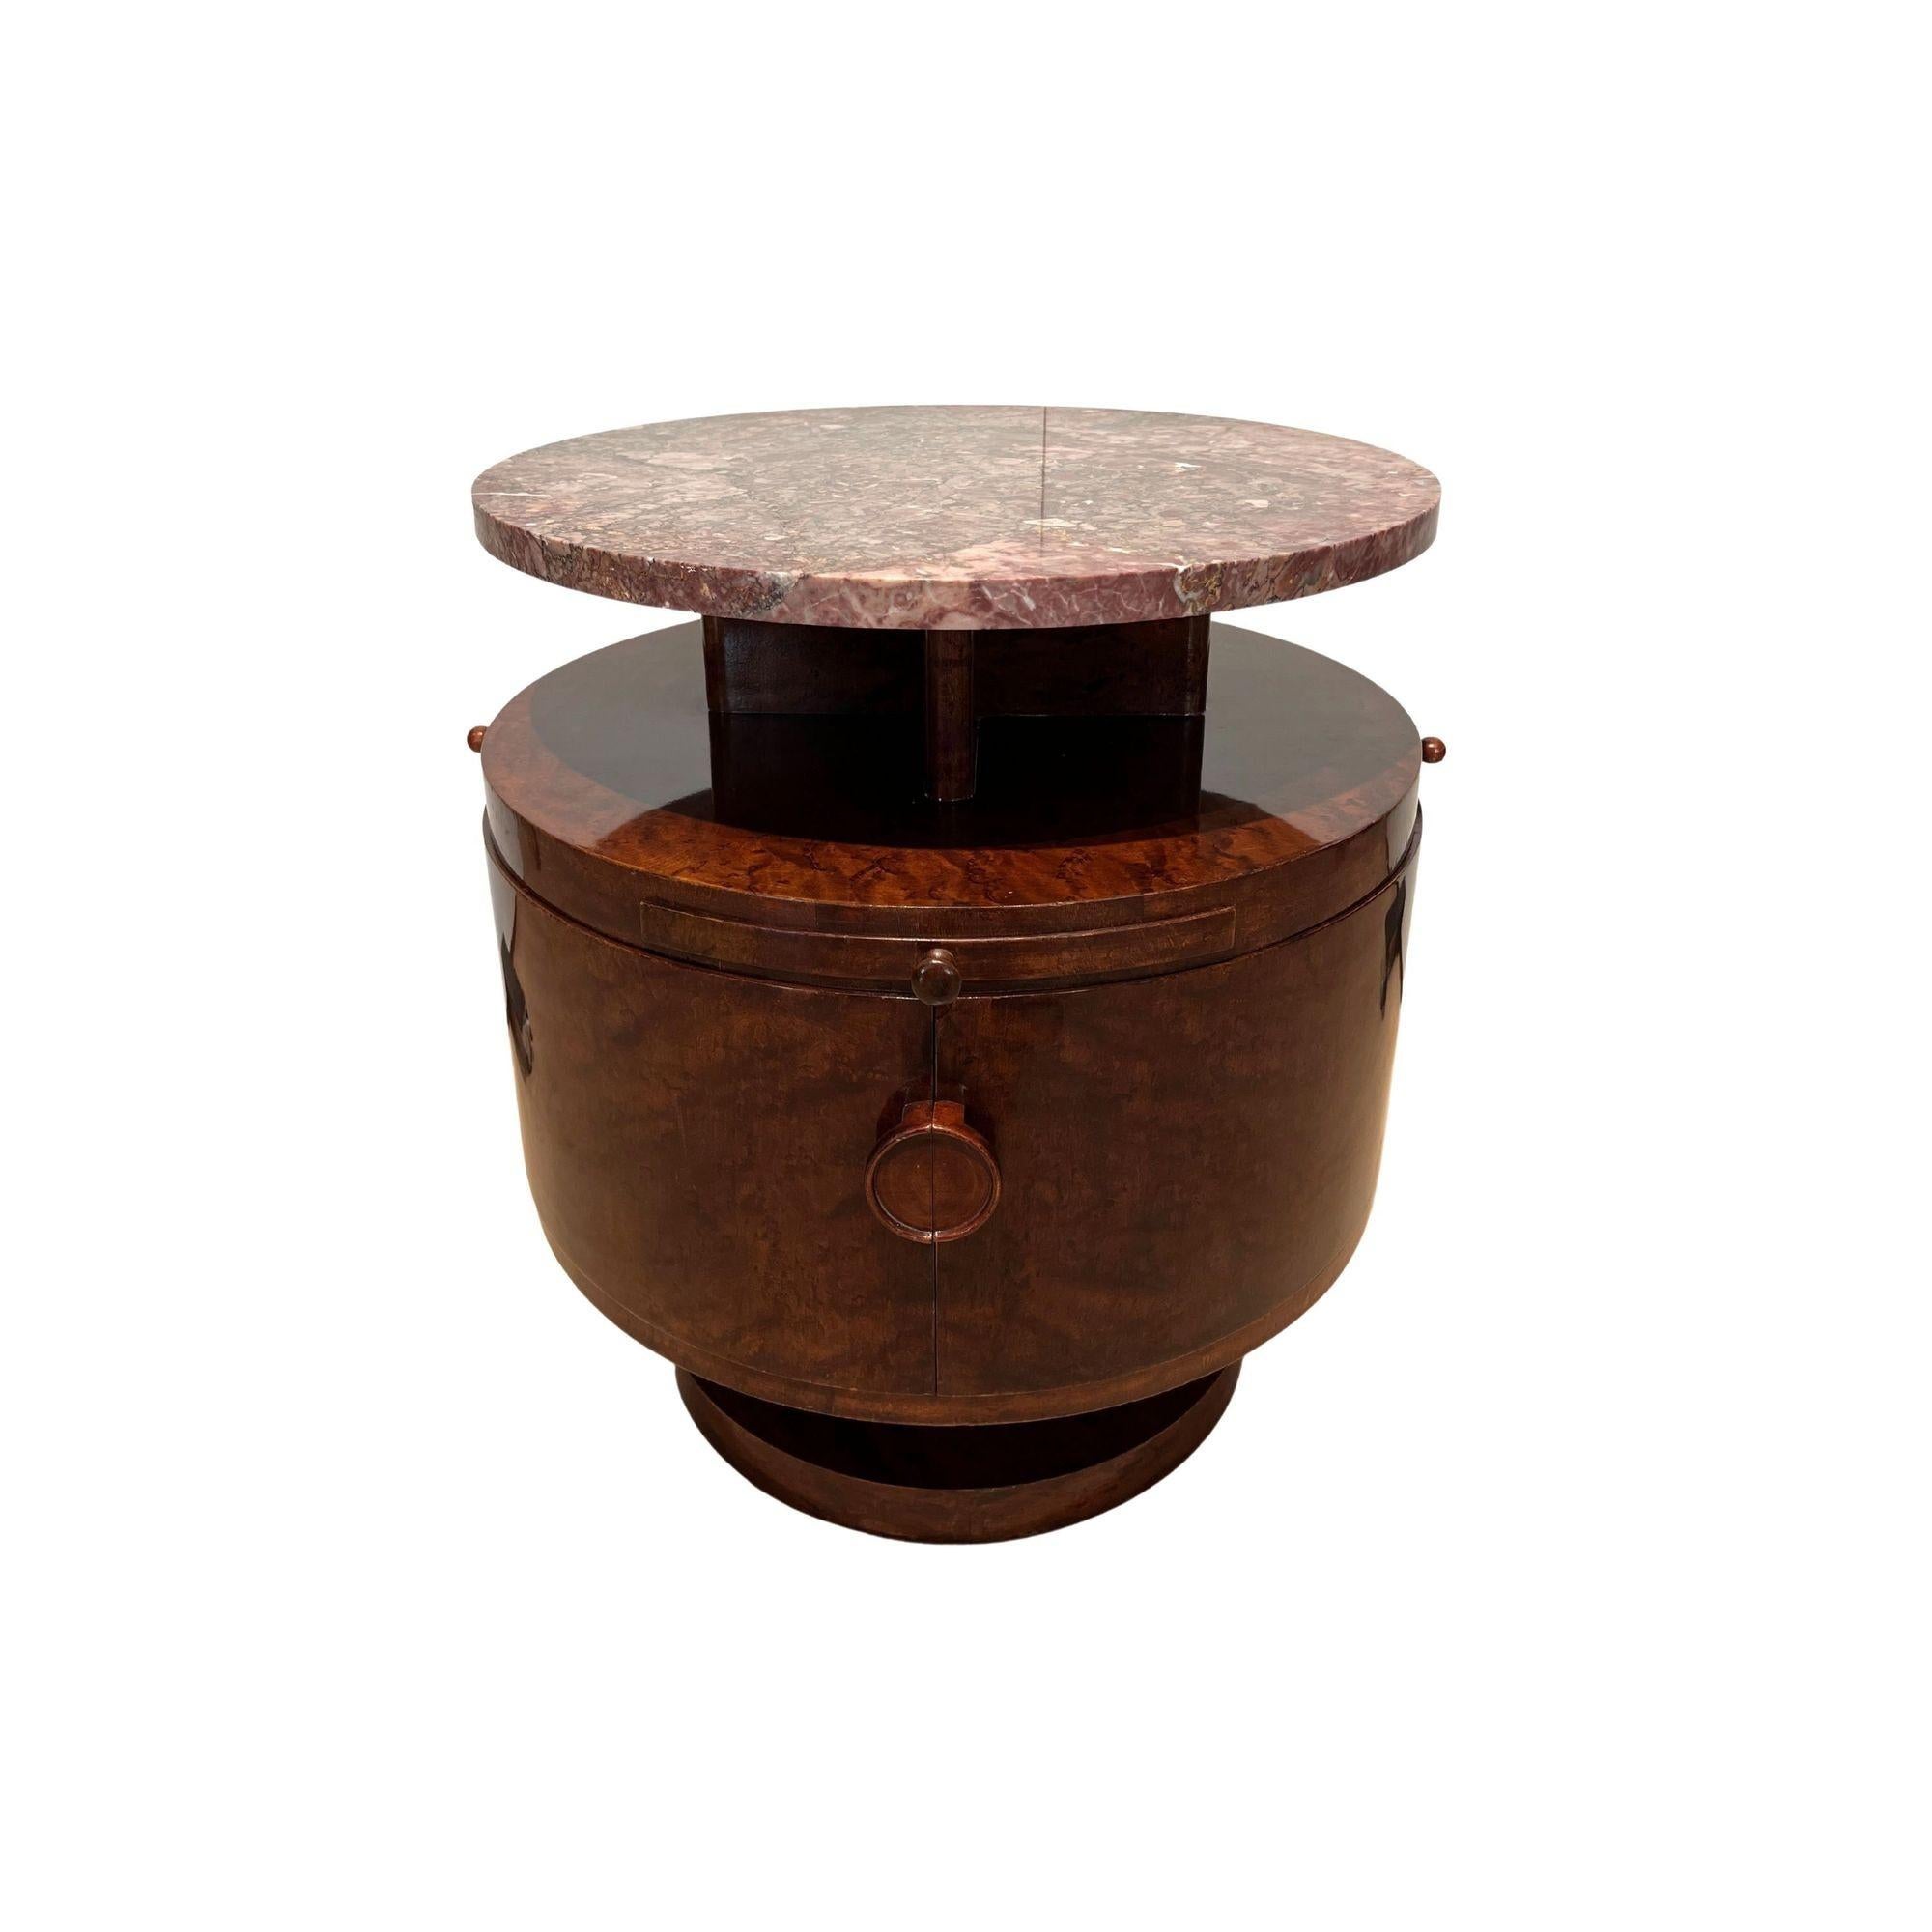 Elegant Art Deco revolving drum table or side table, perfect for adding a touch of luxury and sophistication to any space. This unique table features a round design with birdseye maple veneer that has been originally stained and polished. The table